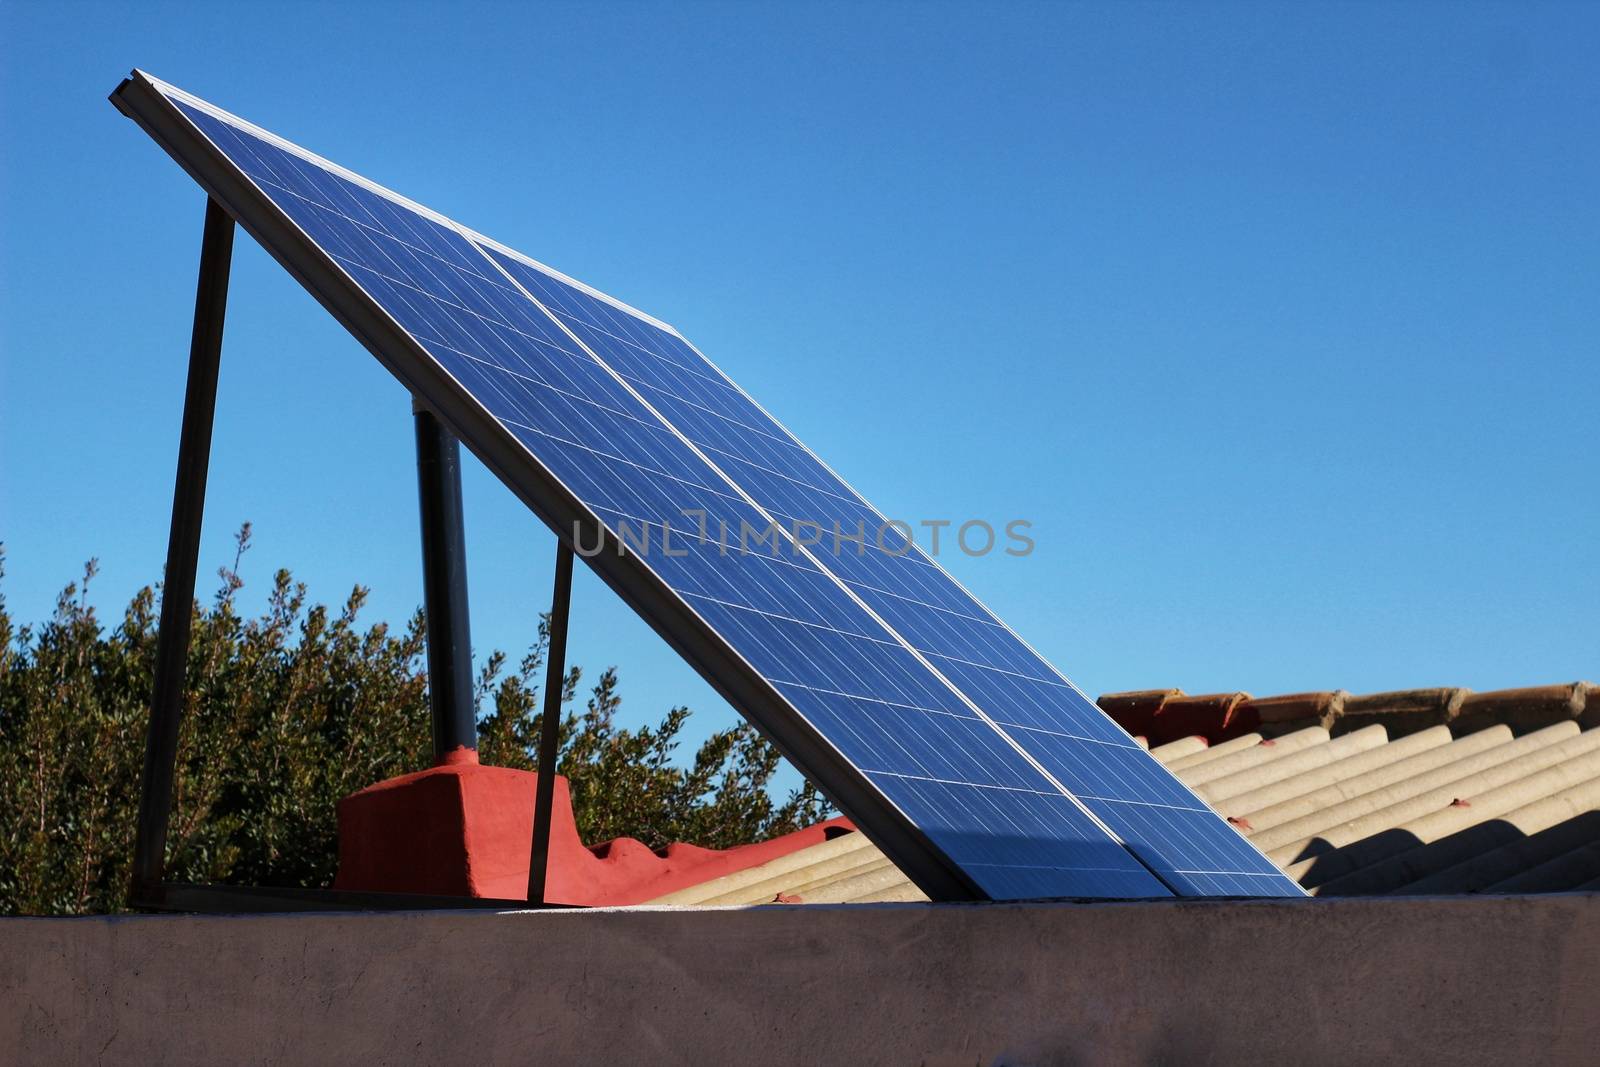 Solar energy plates on the roof by soniabonet